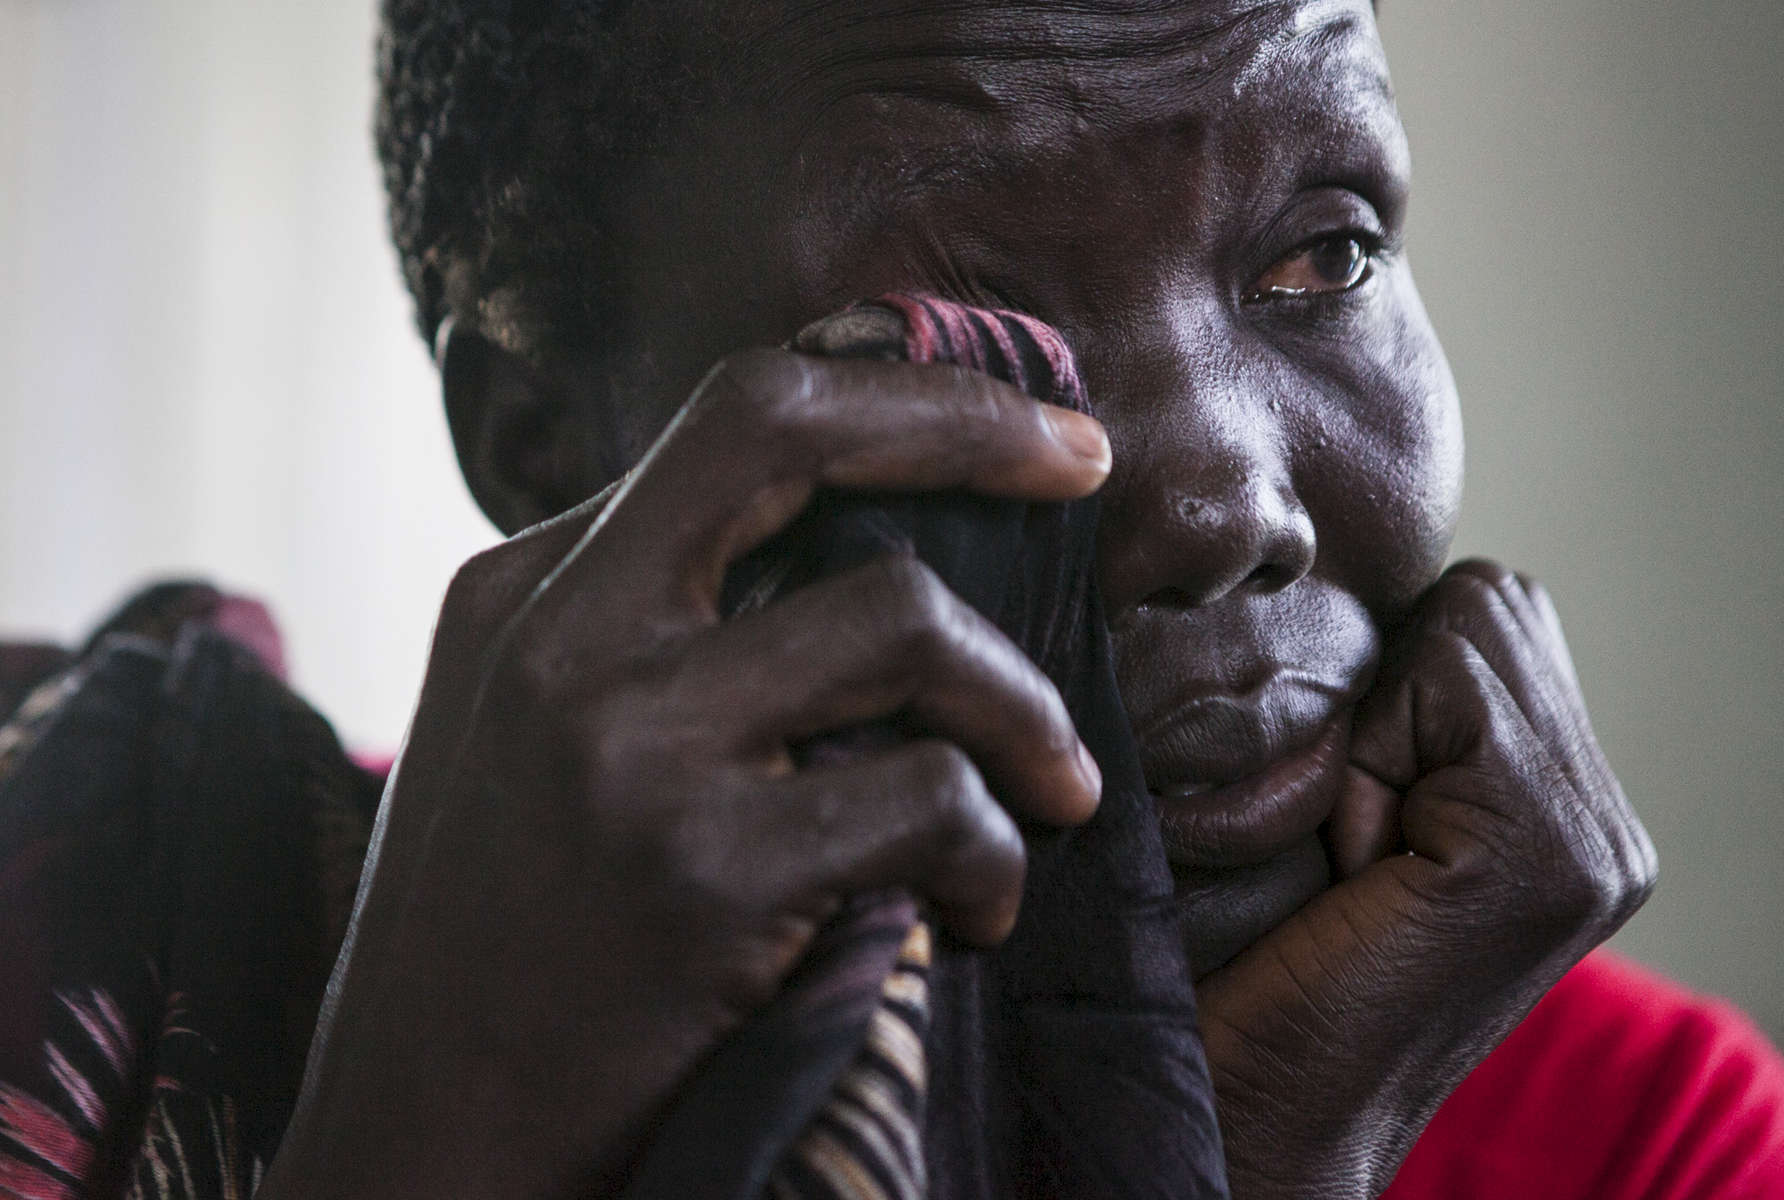 Mary Akich, 38, cries while recounting the circumstances around her son's death during the coordinated attack on February 17th and 18th of this year in the Protection of Civilians (POC) site at the United Nations Mission in South Sudan (UNMISS) compound in Malakal, South Sudan on Tuesday, July 12, 2016. The Malakal POC site houses over 32,000 displaced people mainly from the Shilluk and Nuer tribes. In February of this year, members of the Dinka tribe, who resided in the camp at the time, carried out a coordinated attack within the site leading to the destruction of hundreds of shelters and many deaths. Since then, most members of the Dinka tribe have fled to Malakal town where they occupy the homes of those still displaced. 